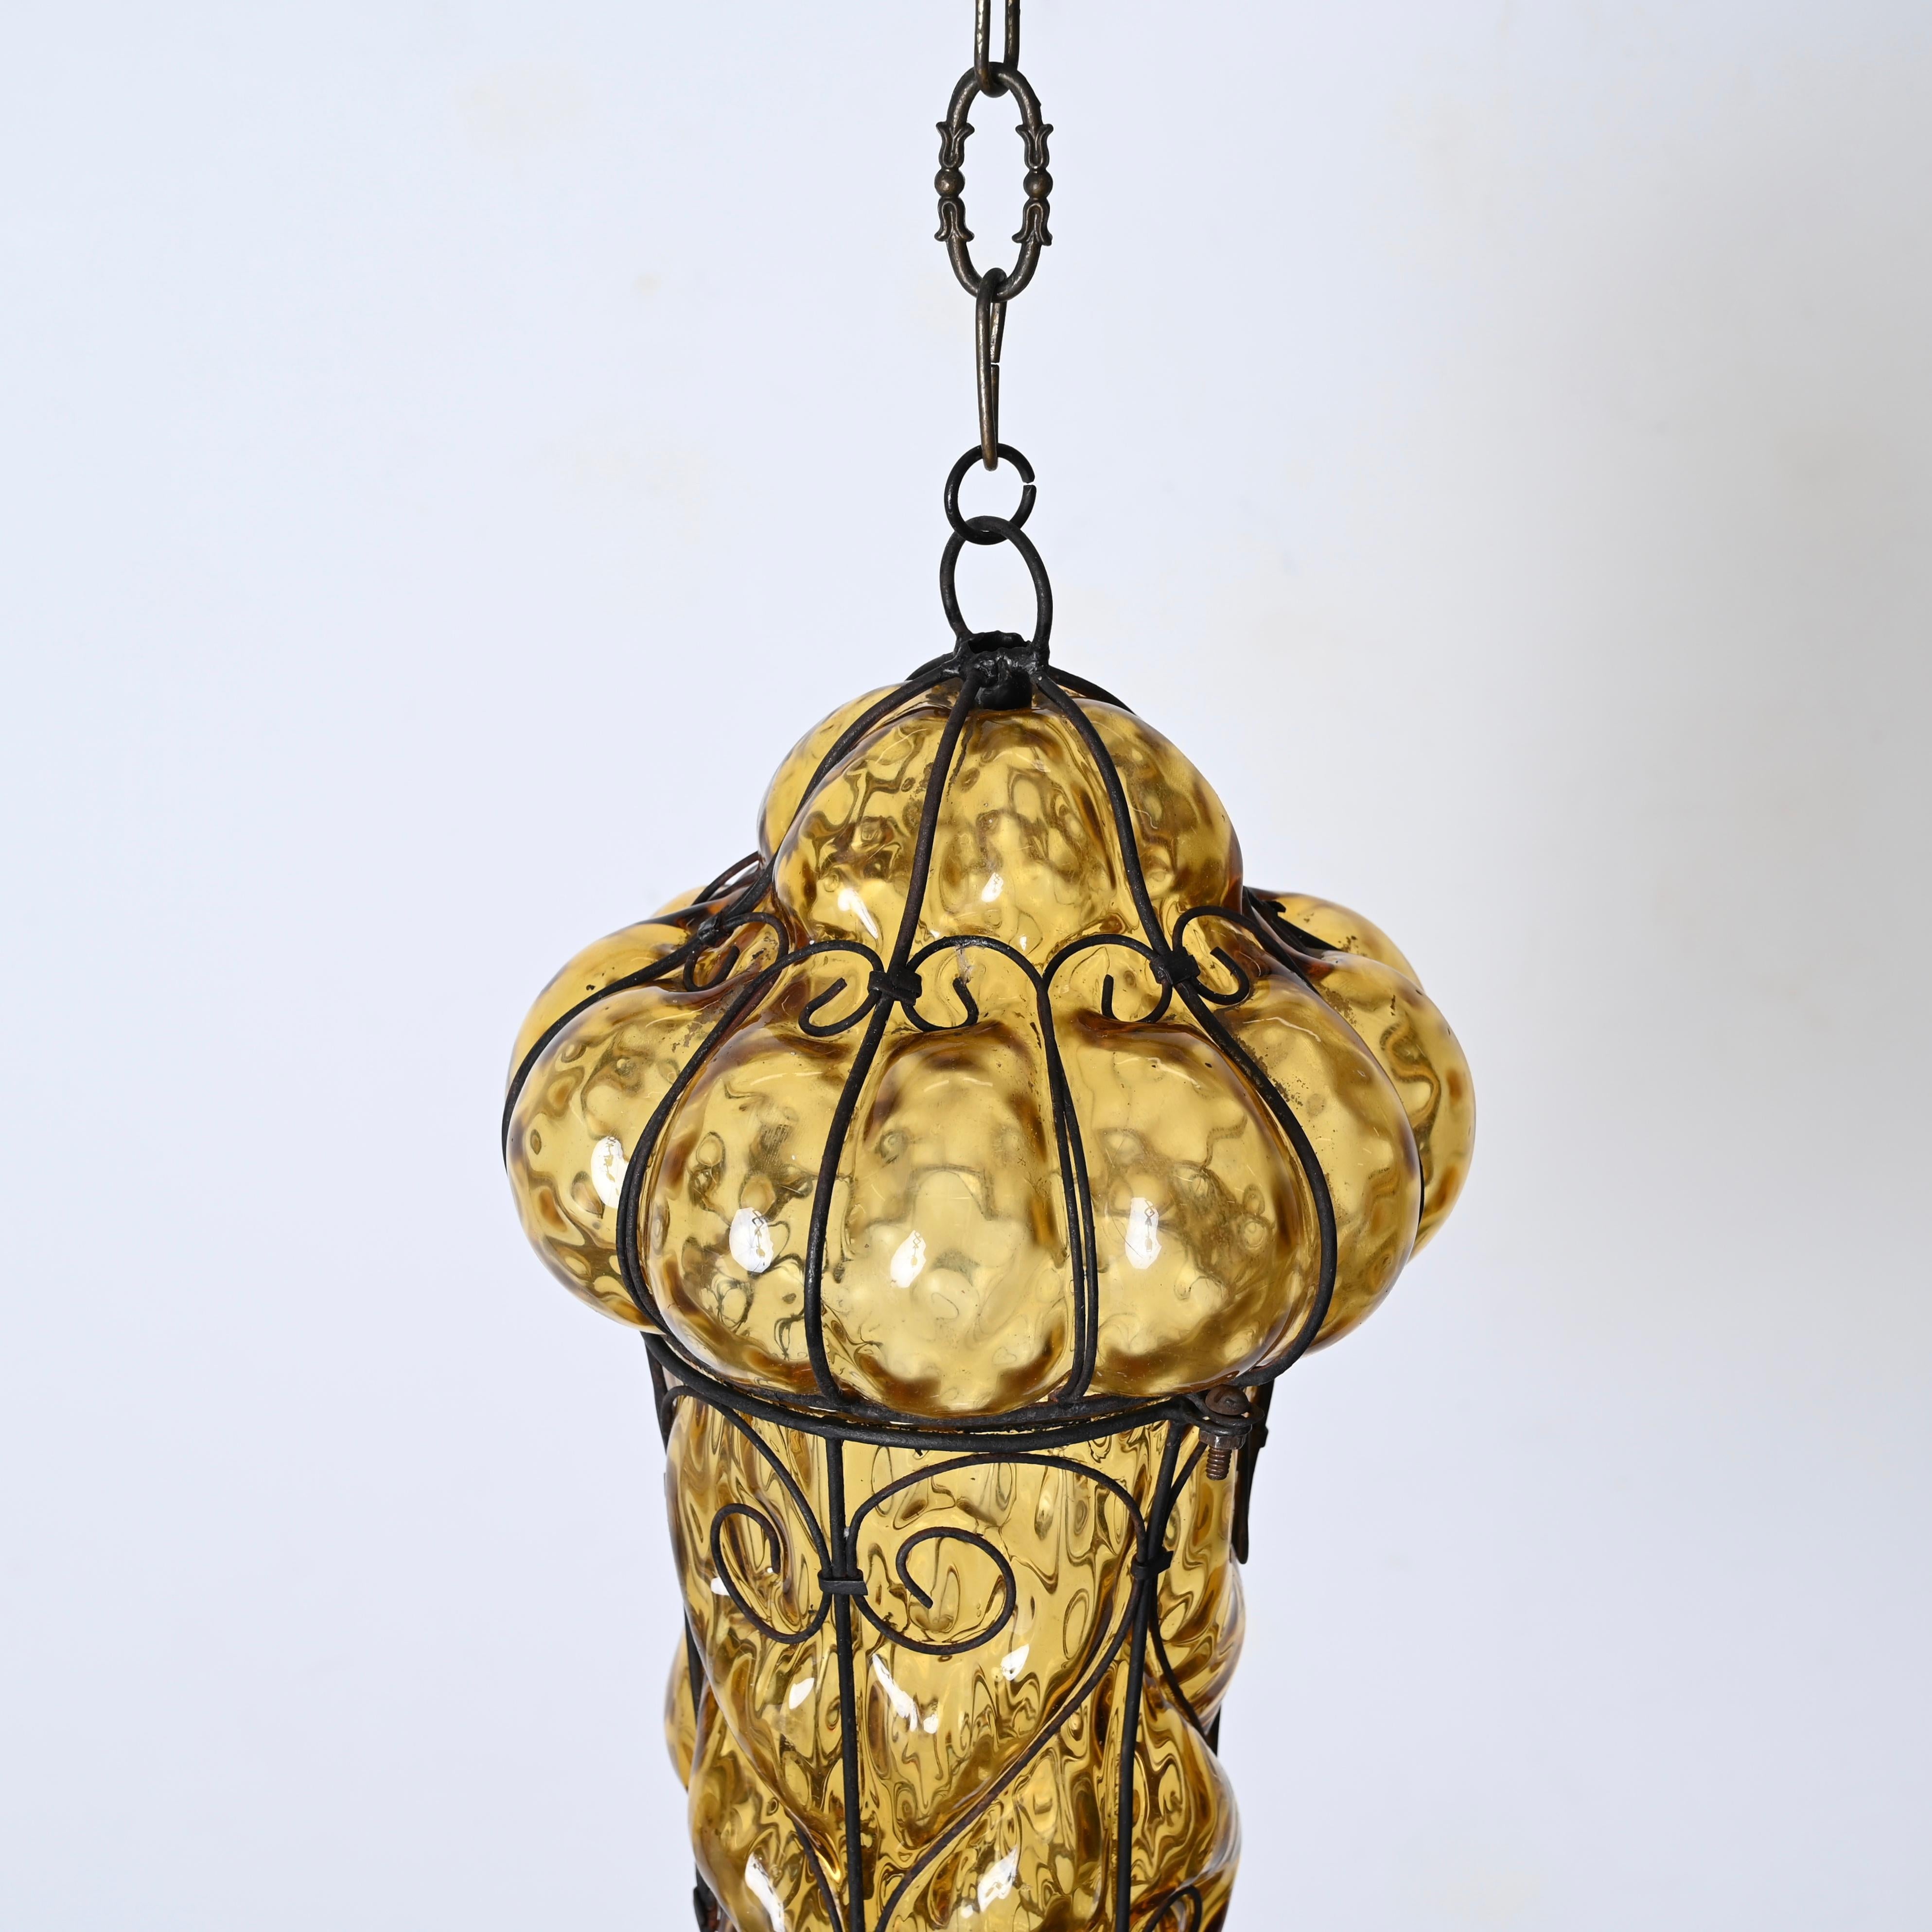 Italian Venetian Murano Mouthblown Amber Glass Chandelier with Iron Frame, Italy 1940s